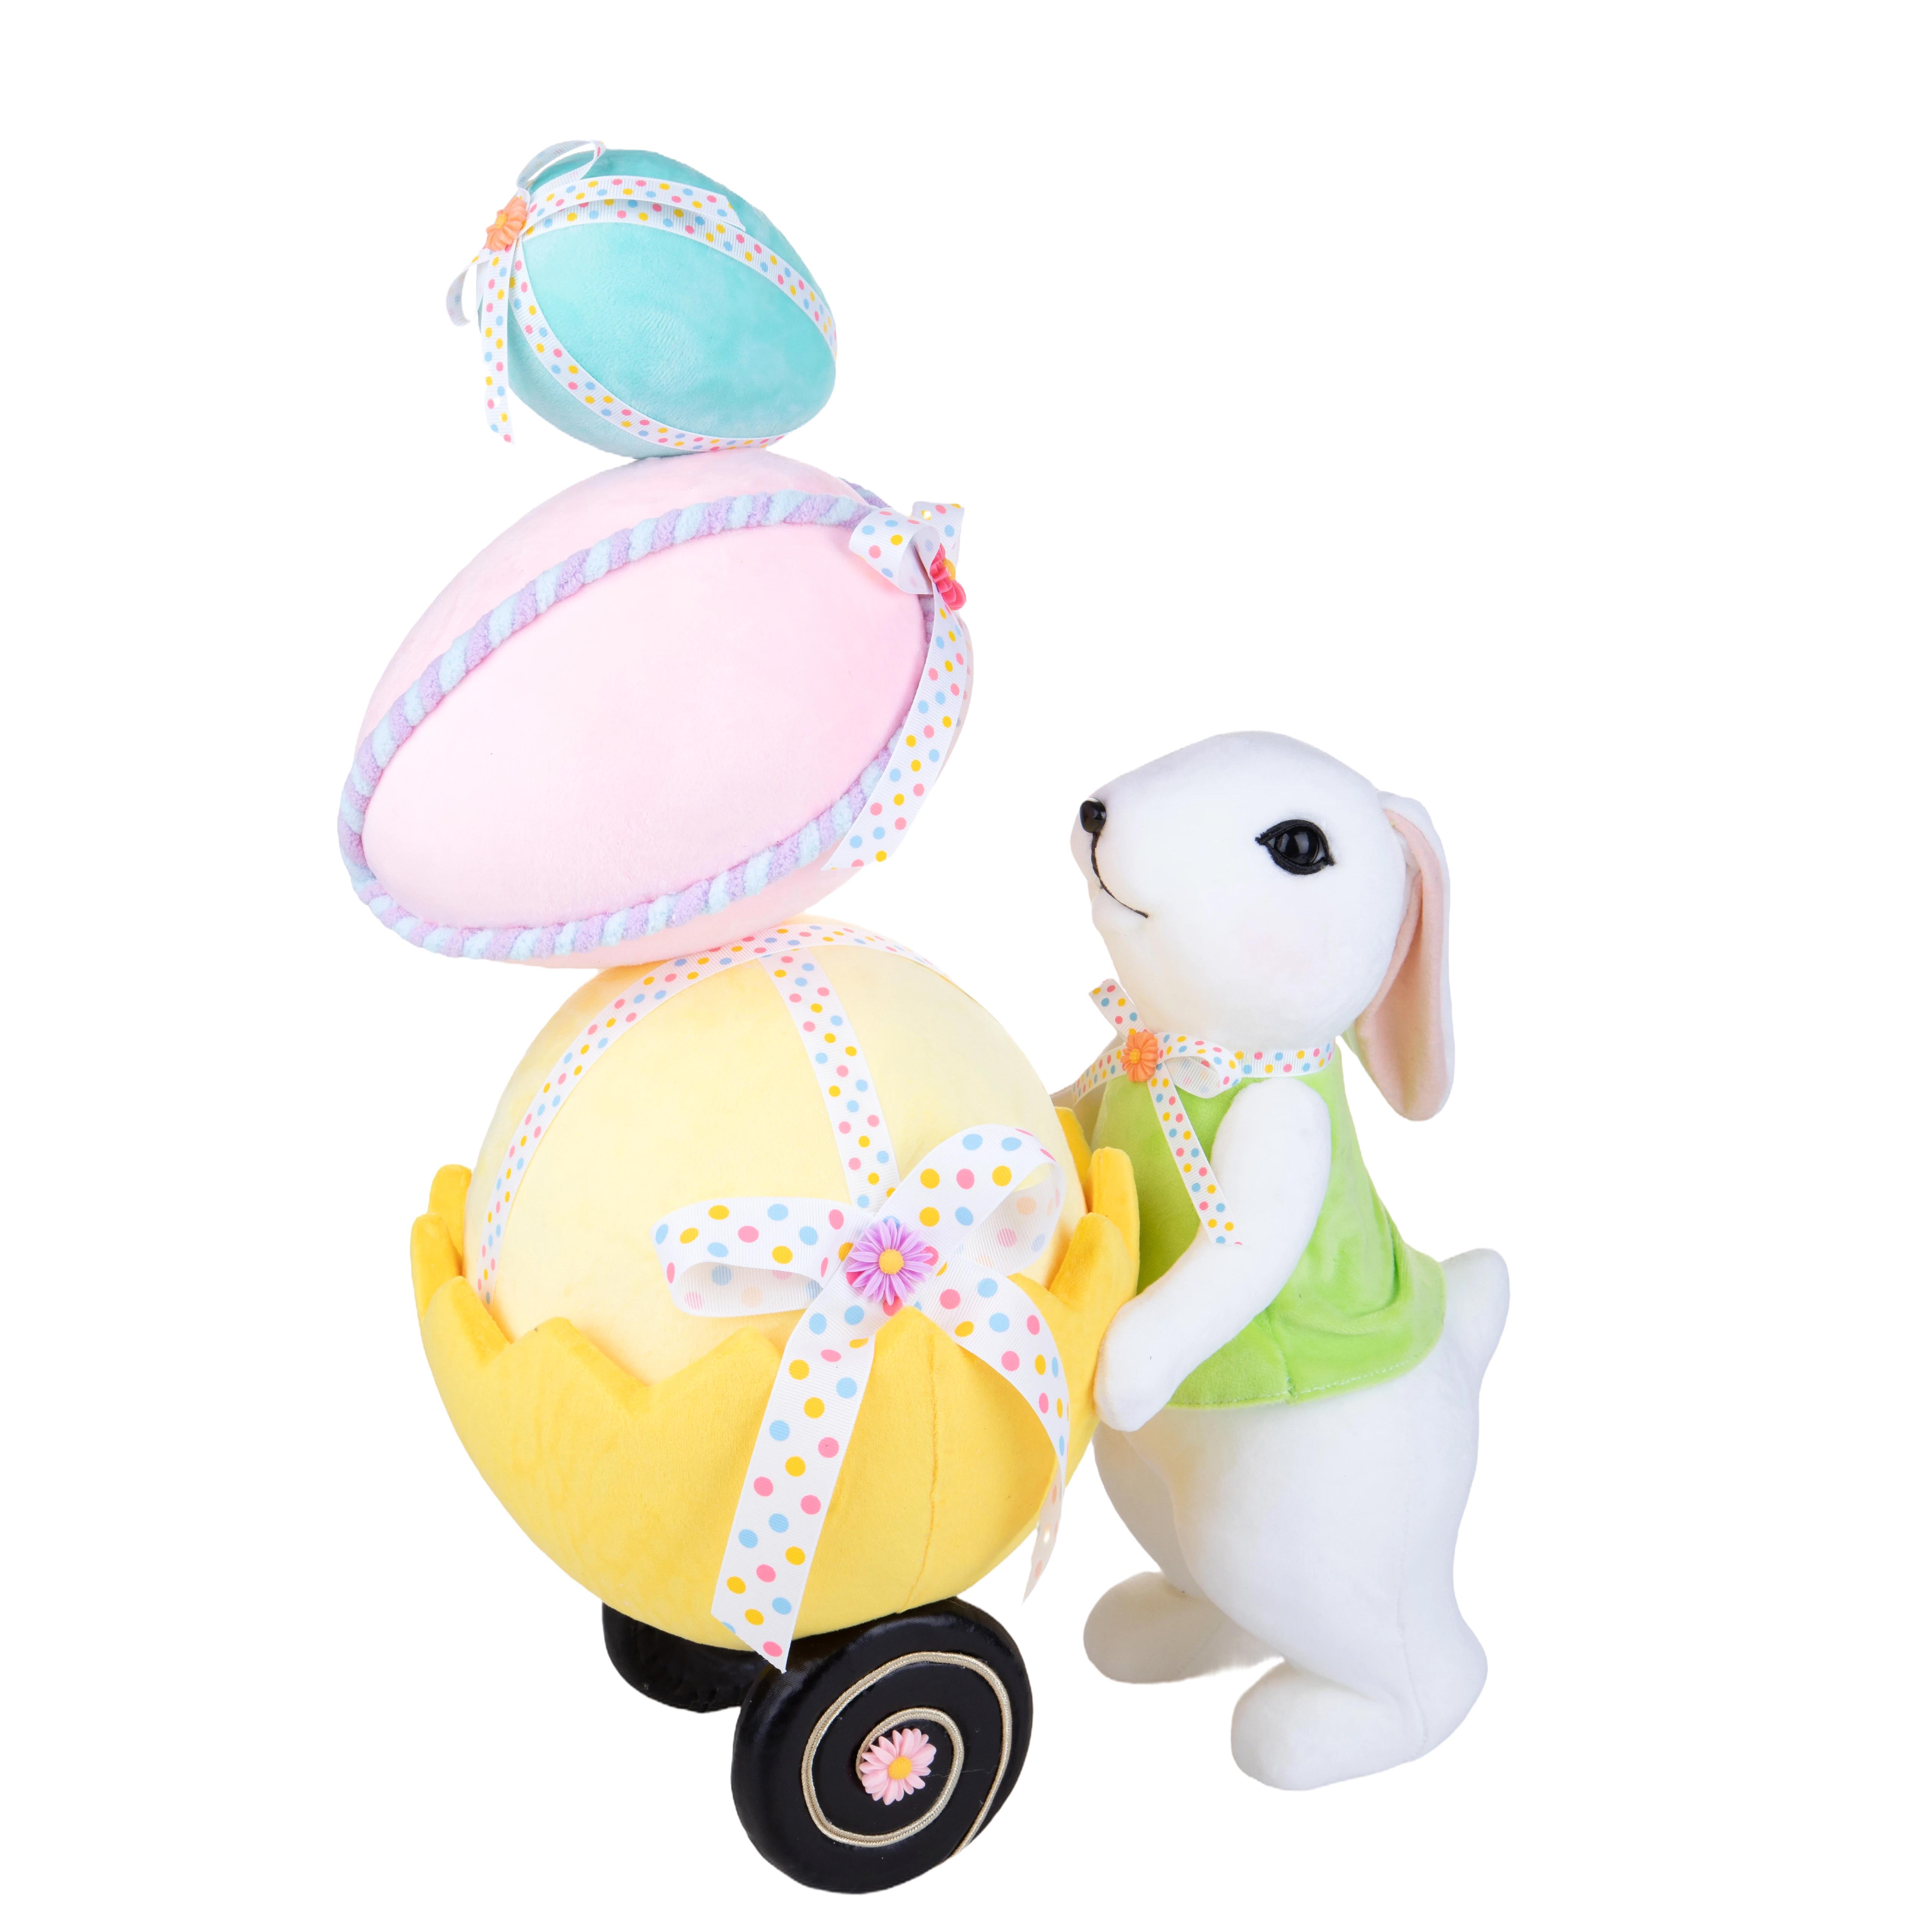 SPRING AND EASTER DECORATIONS, Easter subjects, rabbits, hens, sheep ect., CONIGLIO 37XH.53 CM C/CARRETTO UOVA